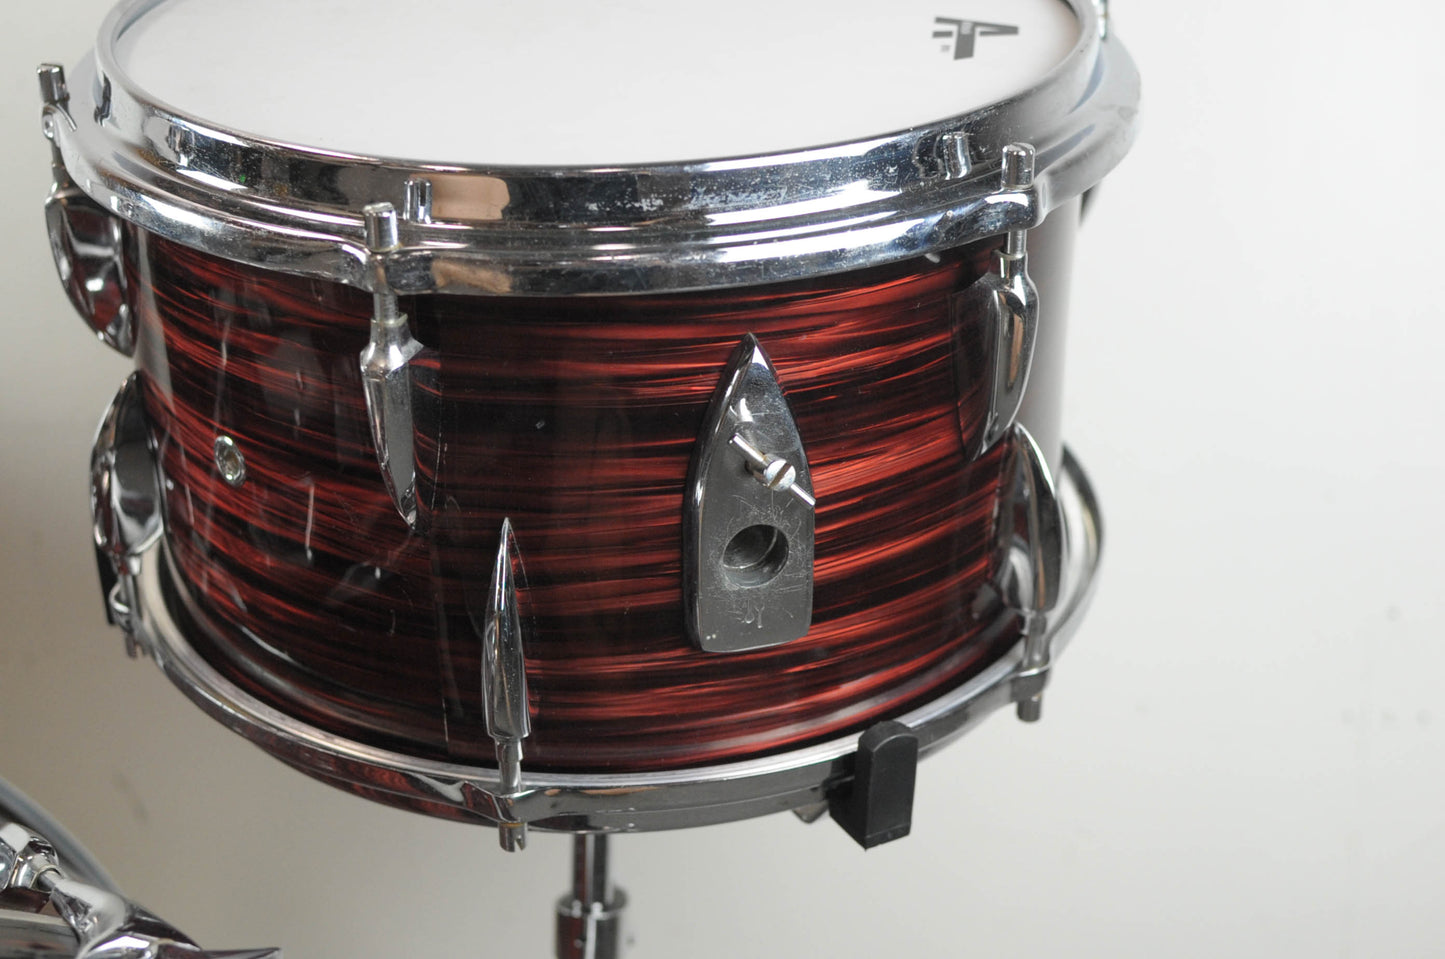 1960s Sonor "K-180" Red Marble Drum Set